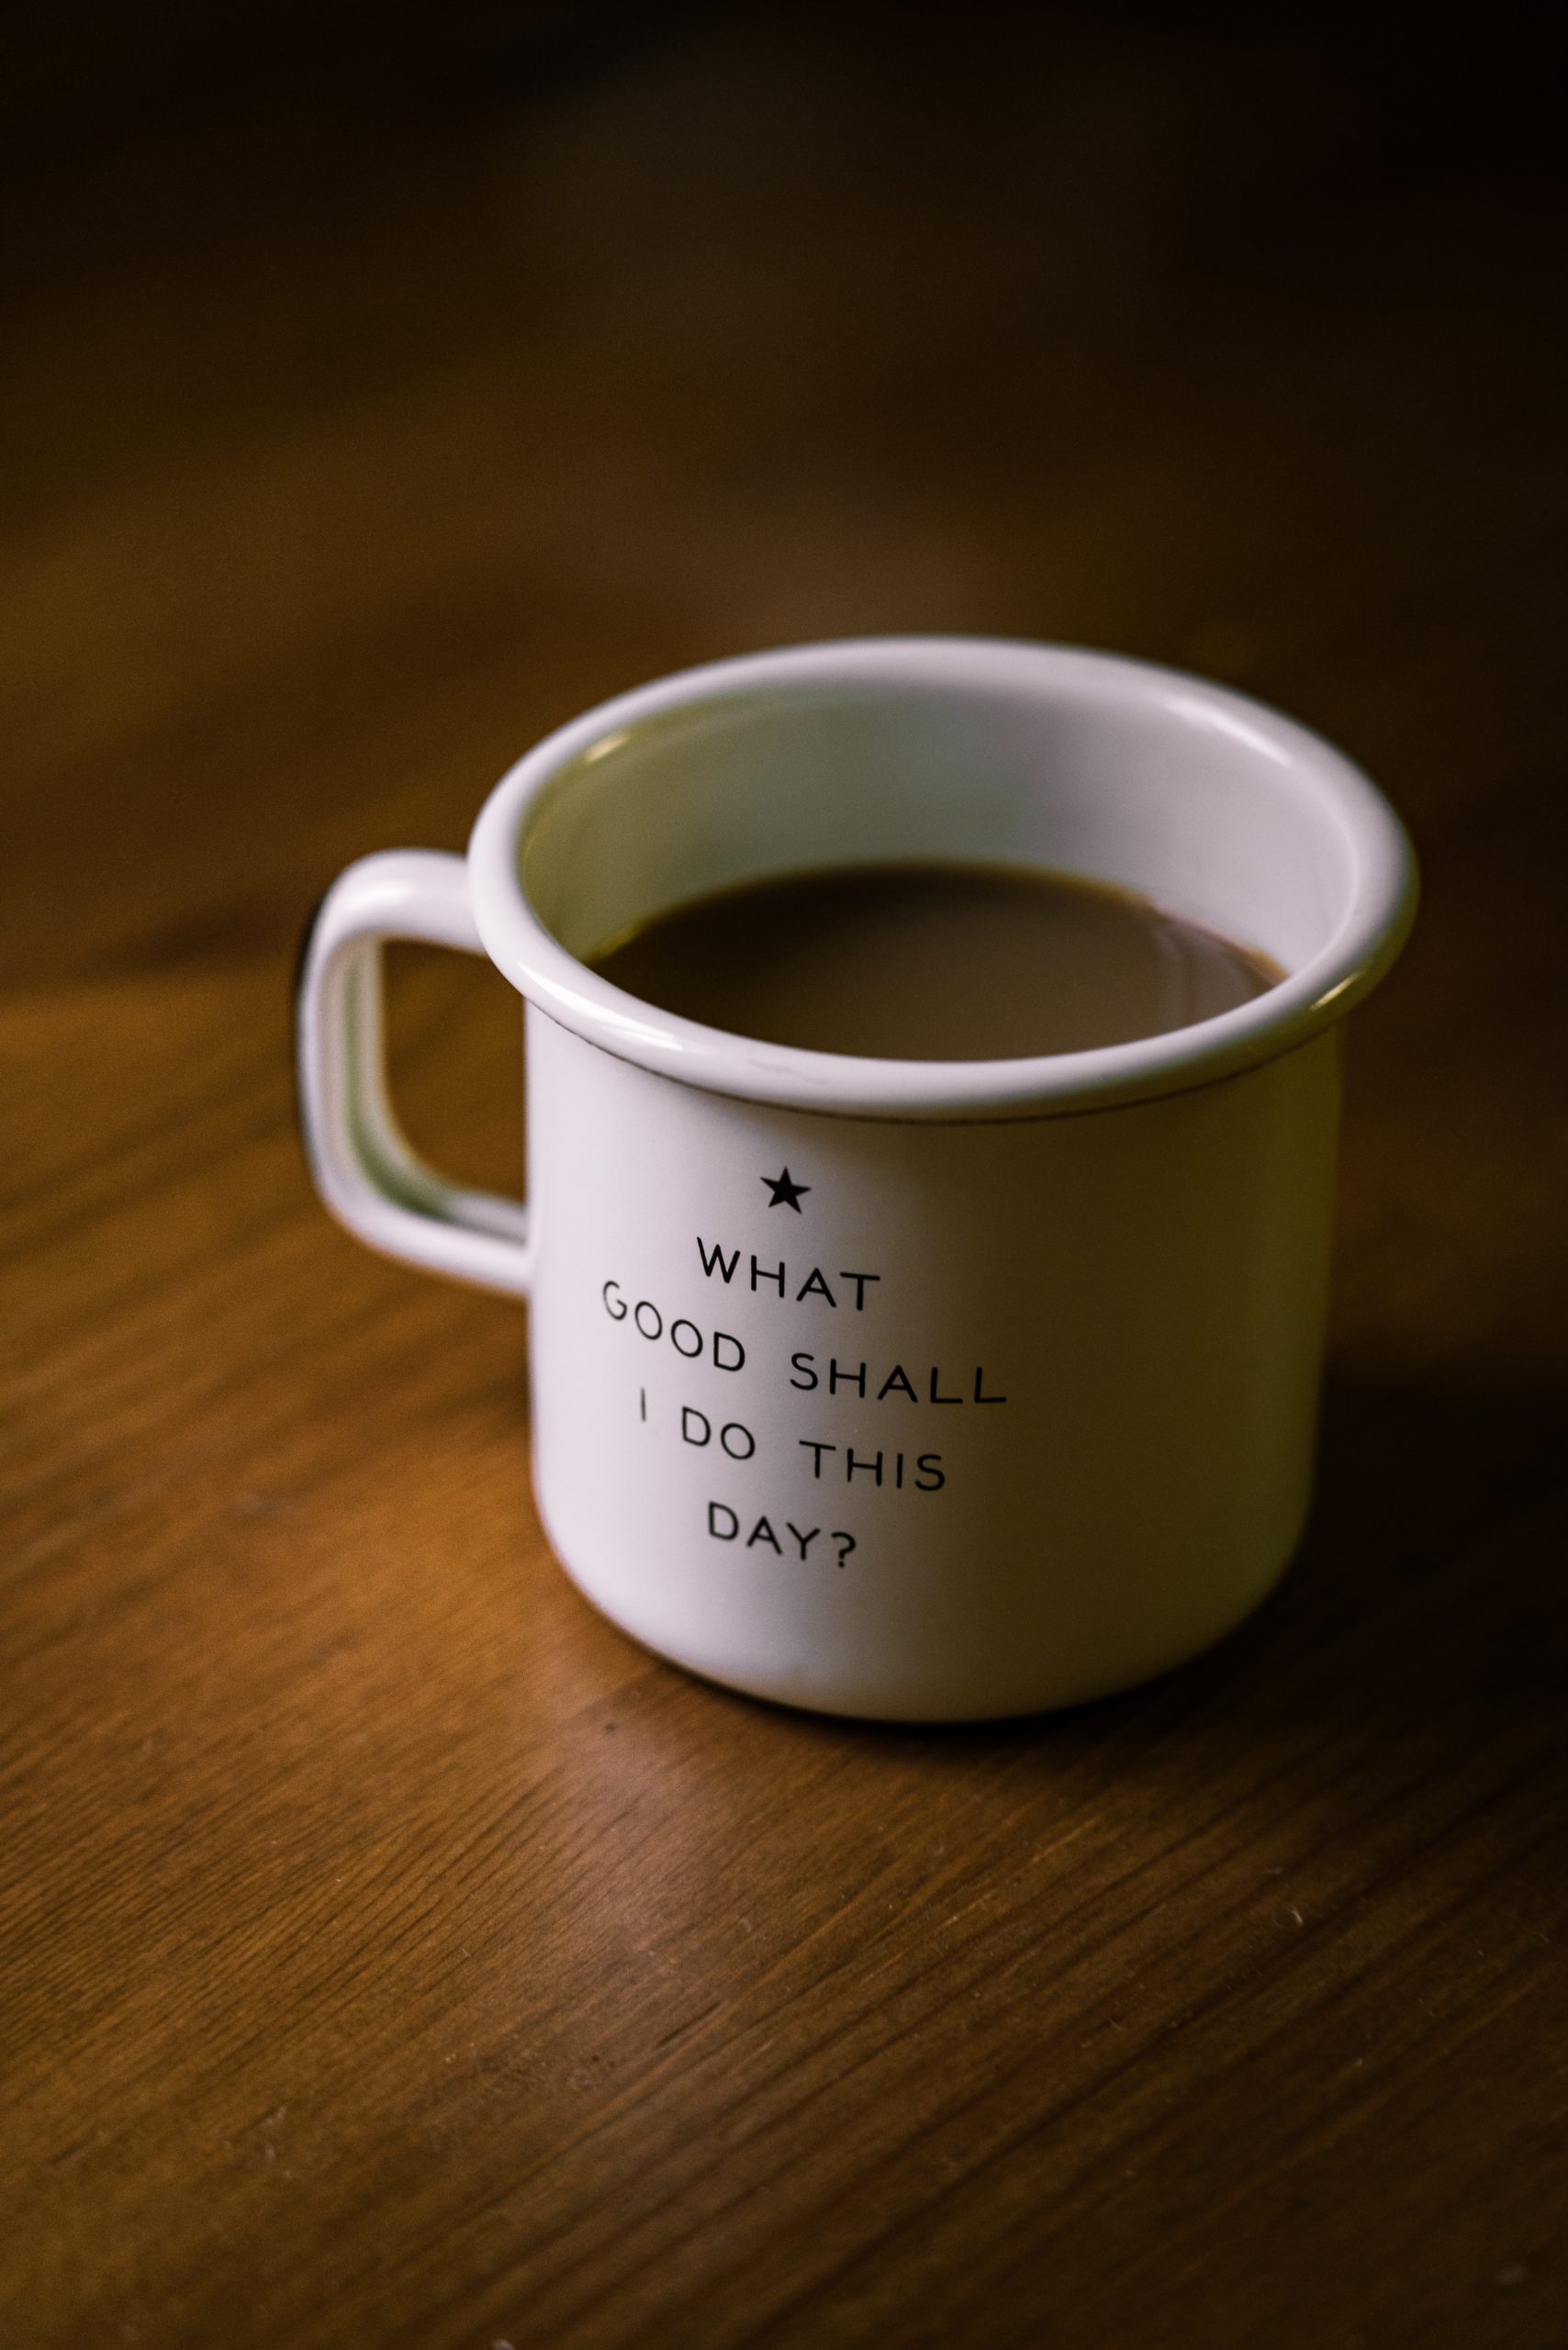 Mug with the words, "What good shall I do this day?"